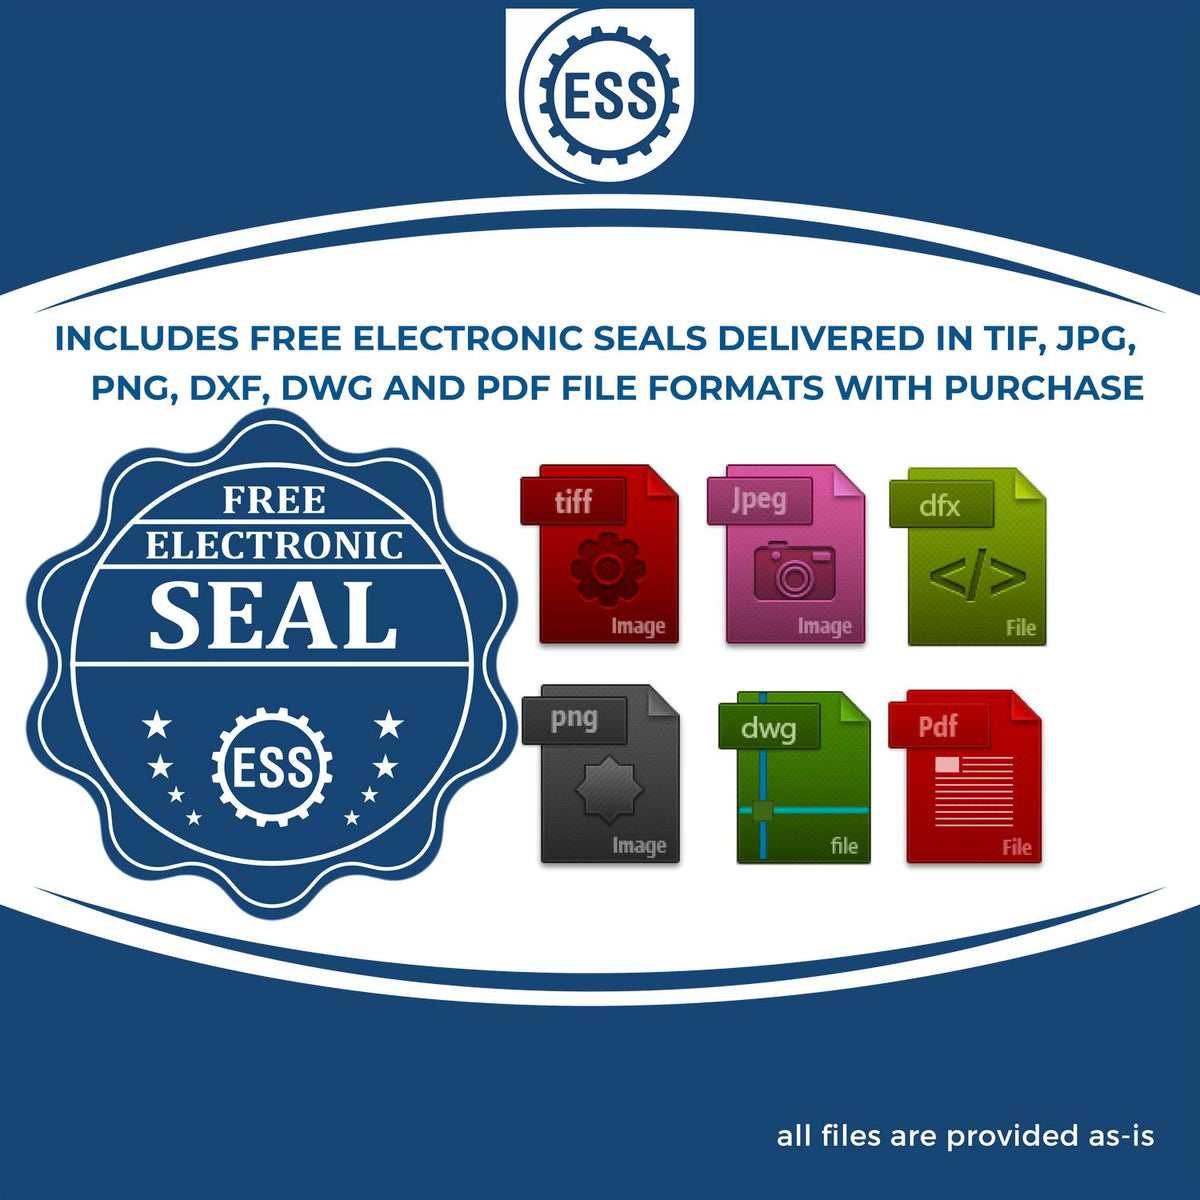 An infographic for the free electronic seal for the Hybrid Michigan Engineer Seal illustrating the different file type icons such as DXF, DWG, TIF, JPG and PNG.